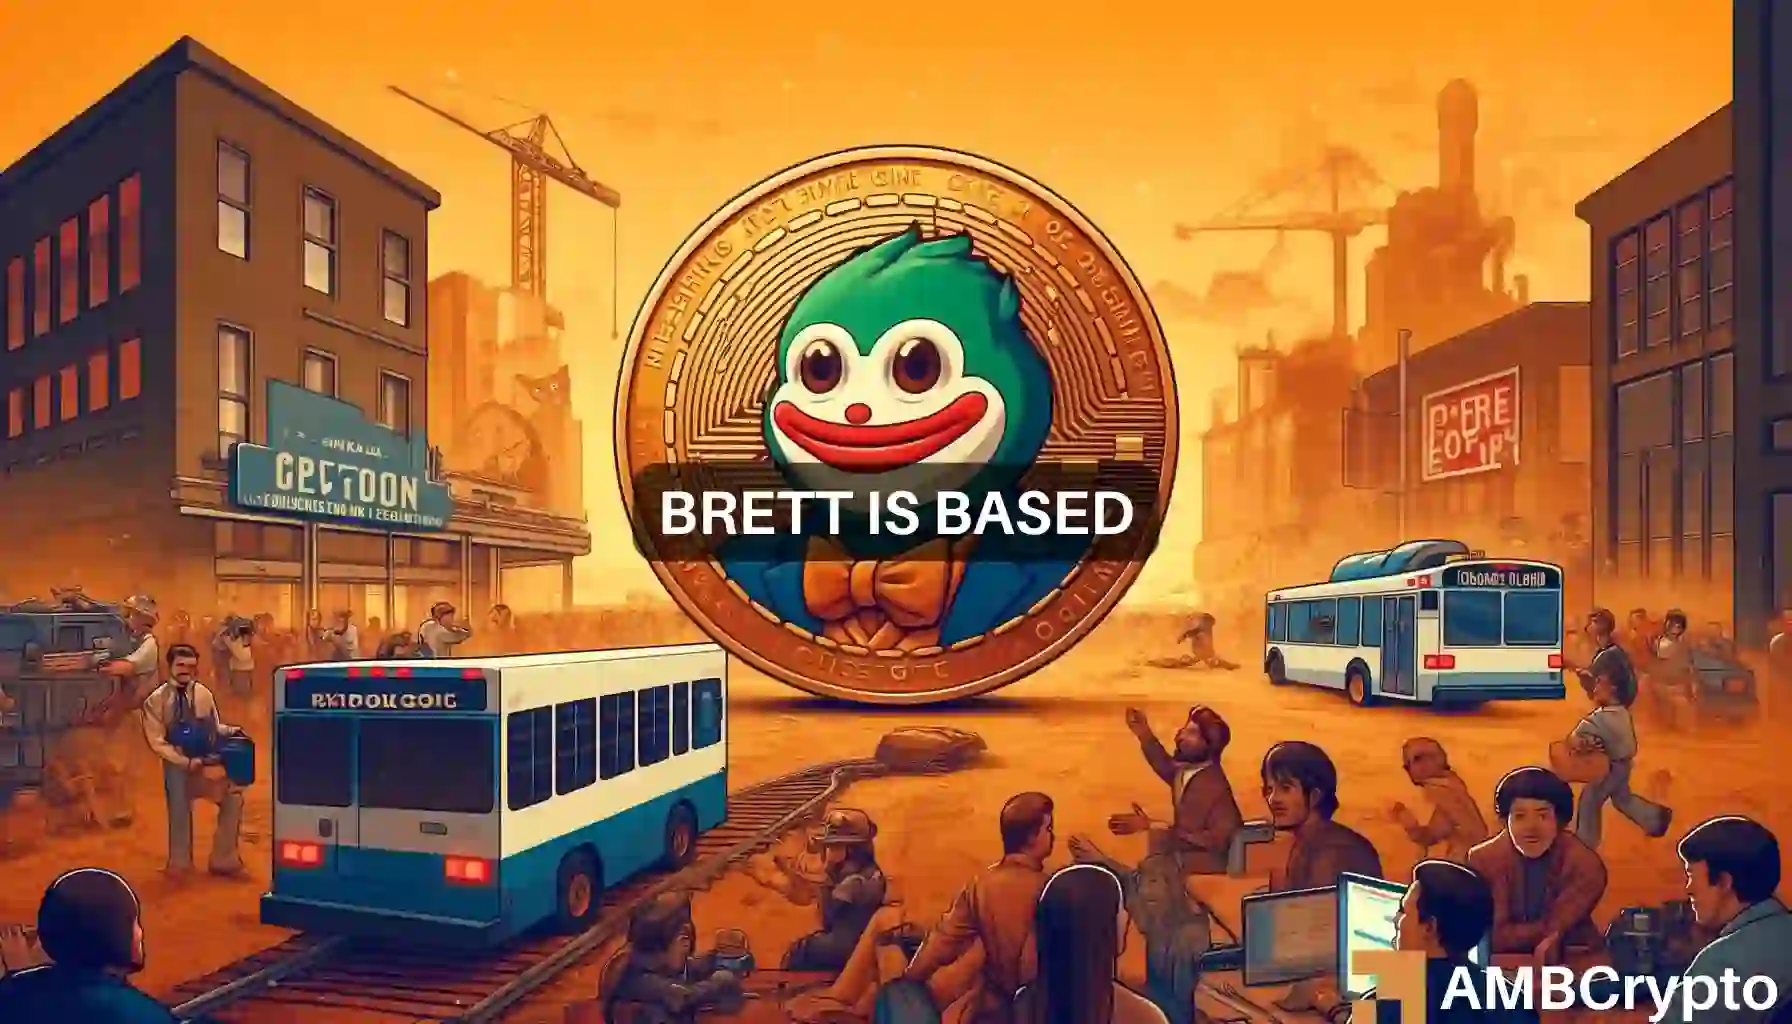 BRETT crypto hits new ATH, then dips – But wait, there’s more!